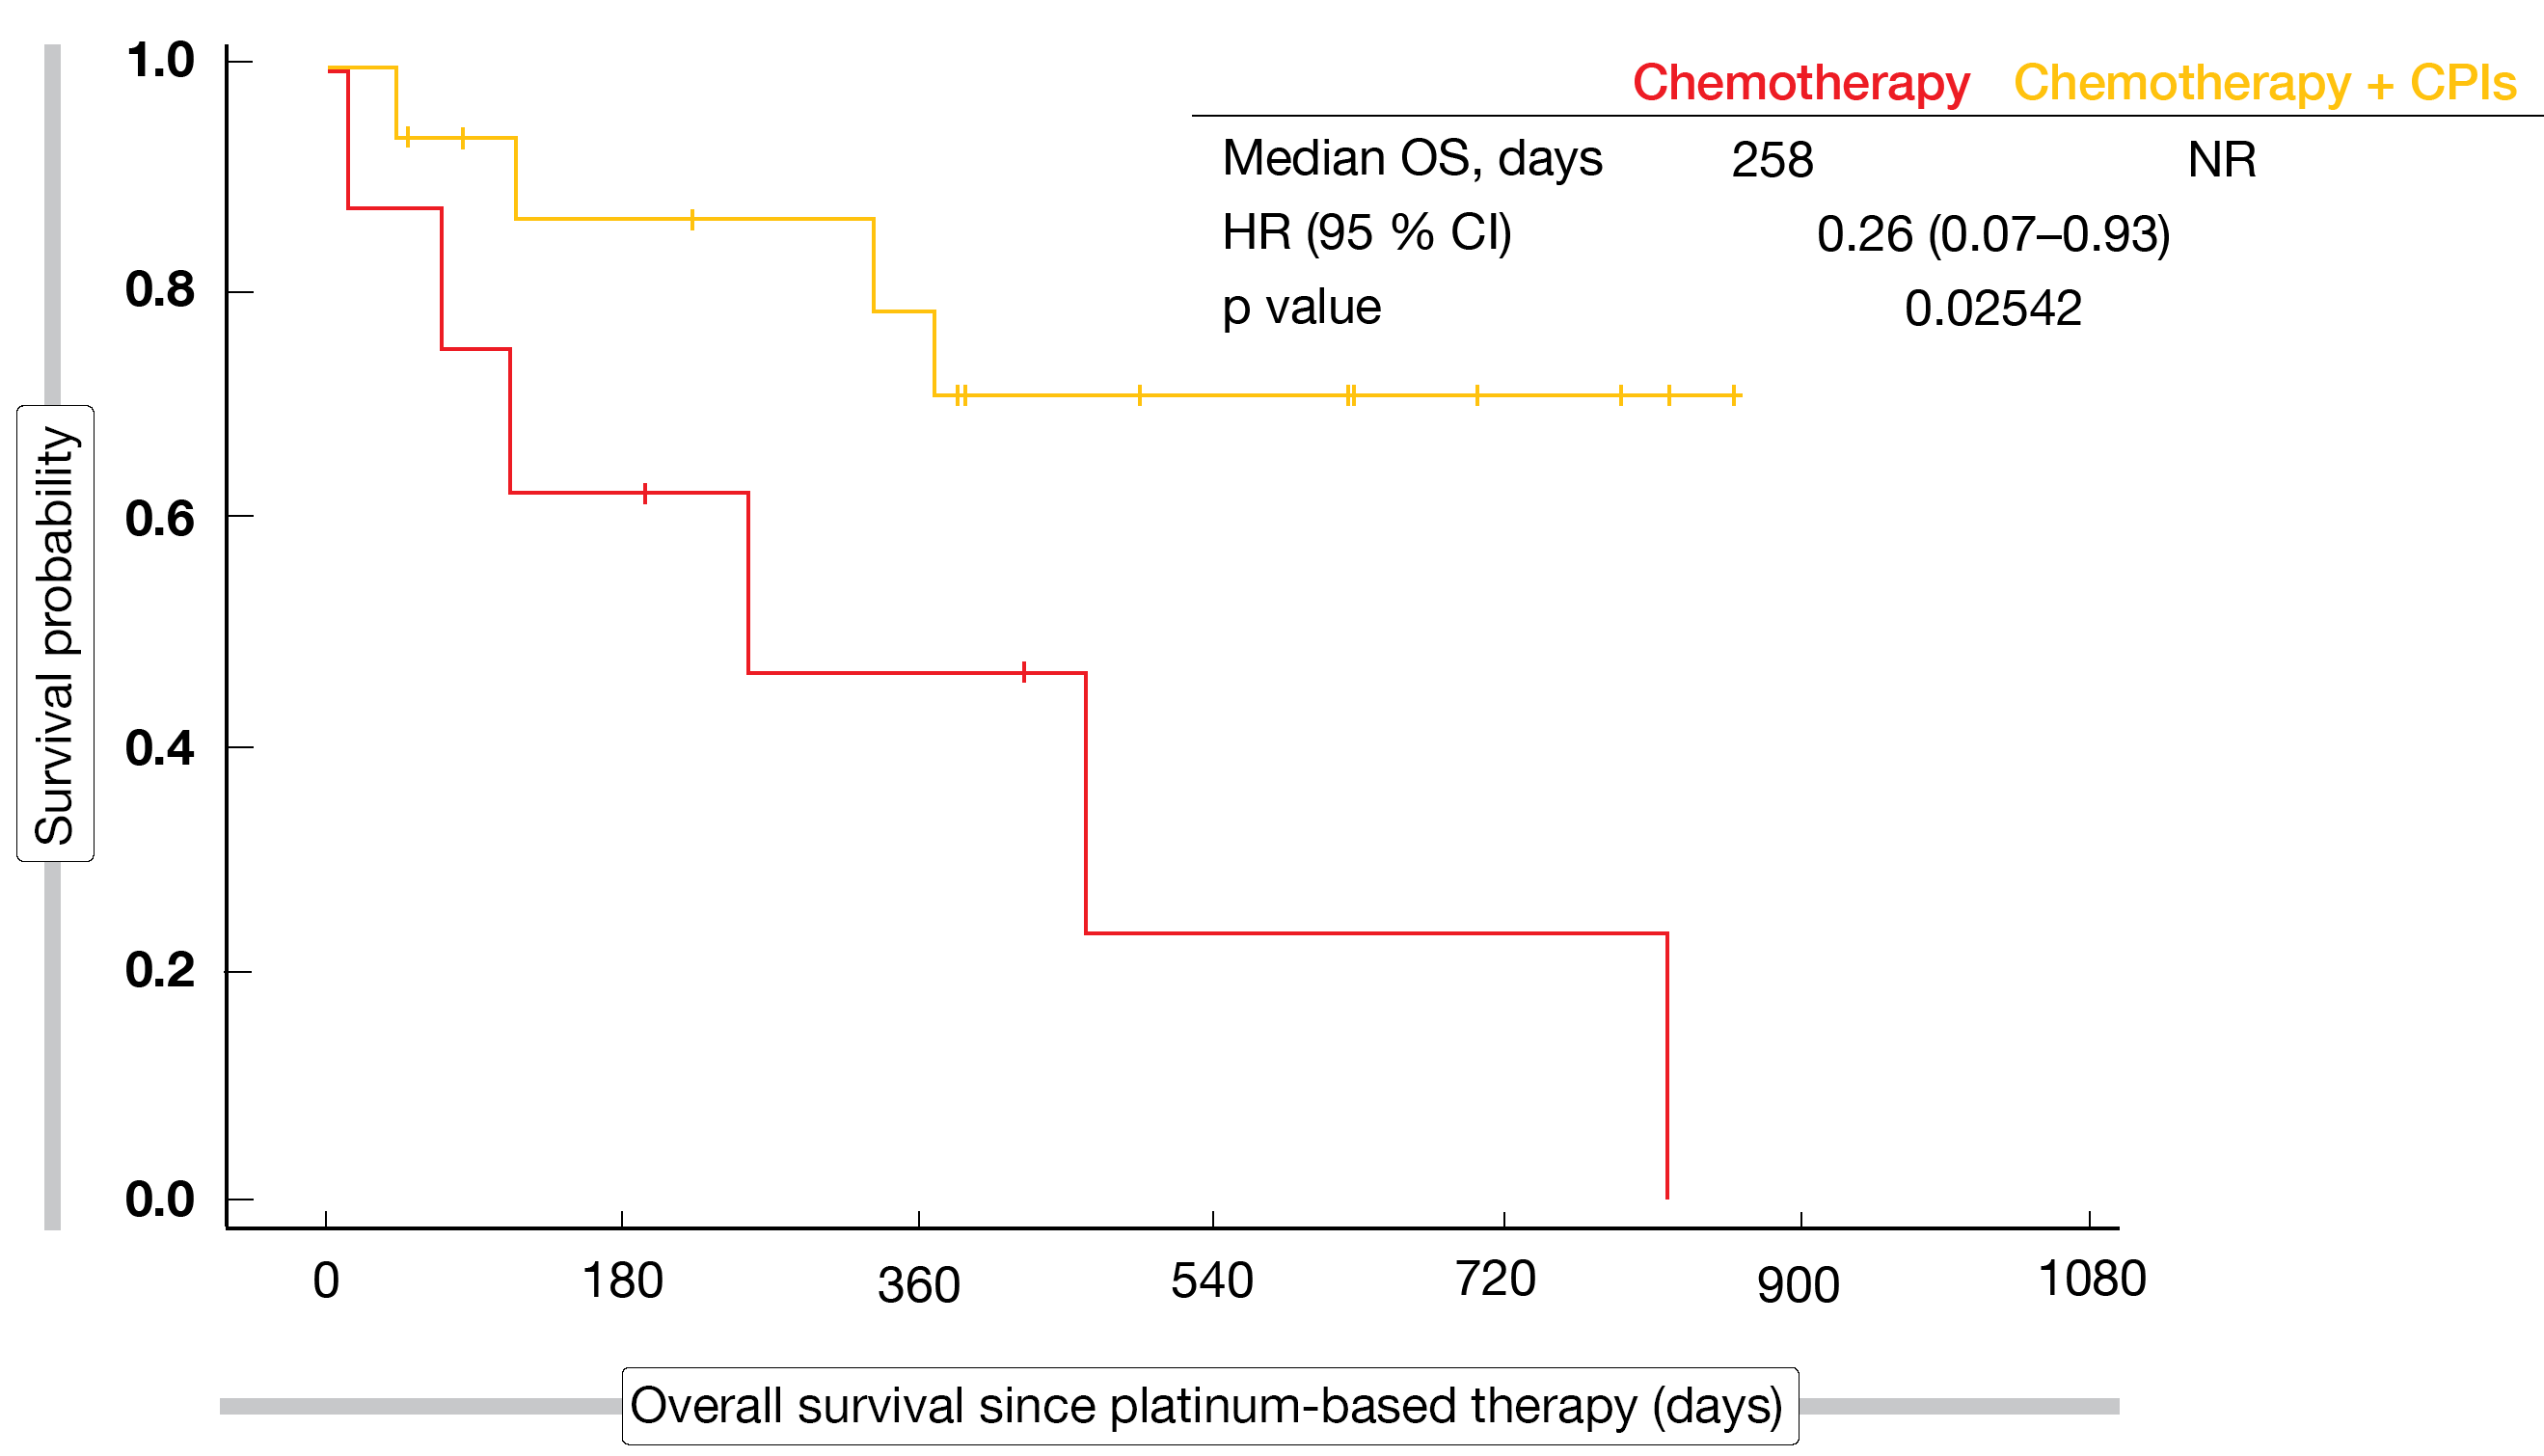 Figure: Overall survival for chemotherapy plus CPIs vs. chemotherapy in patients with KRASG12C mutations